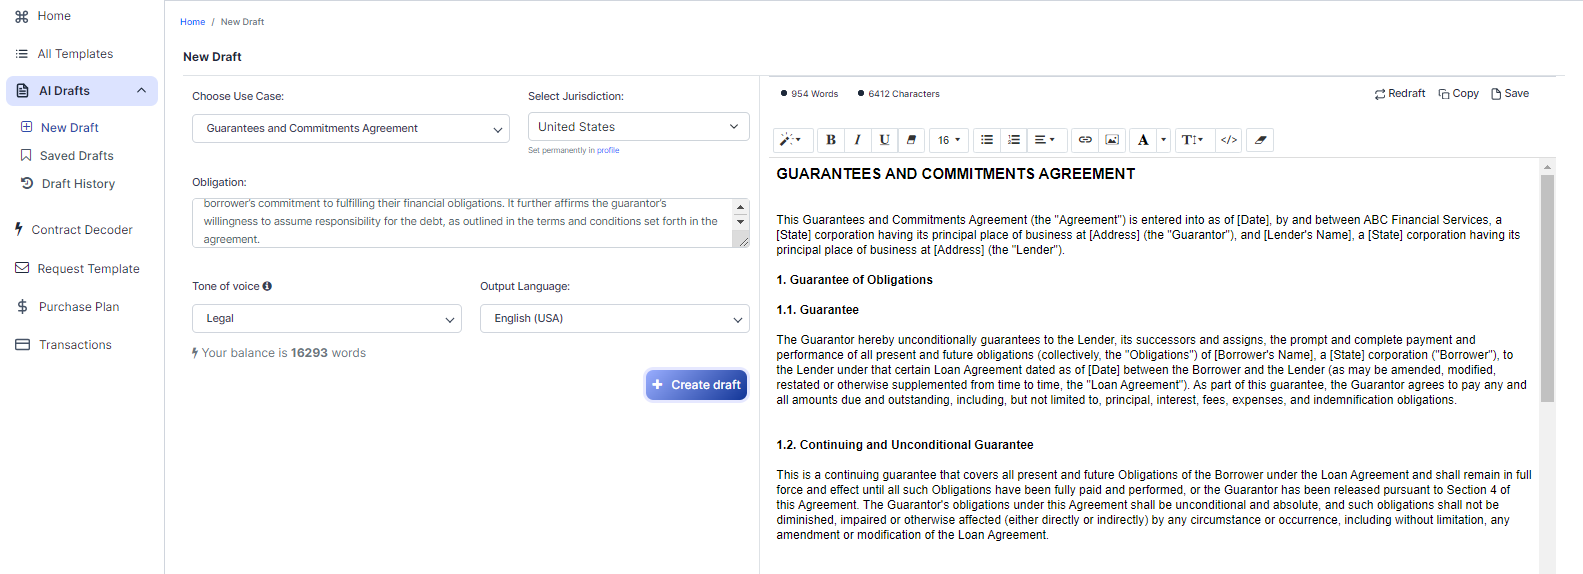 Guarantees and Commitments Agreement template